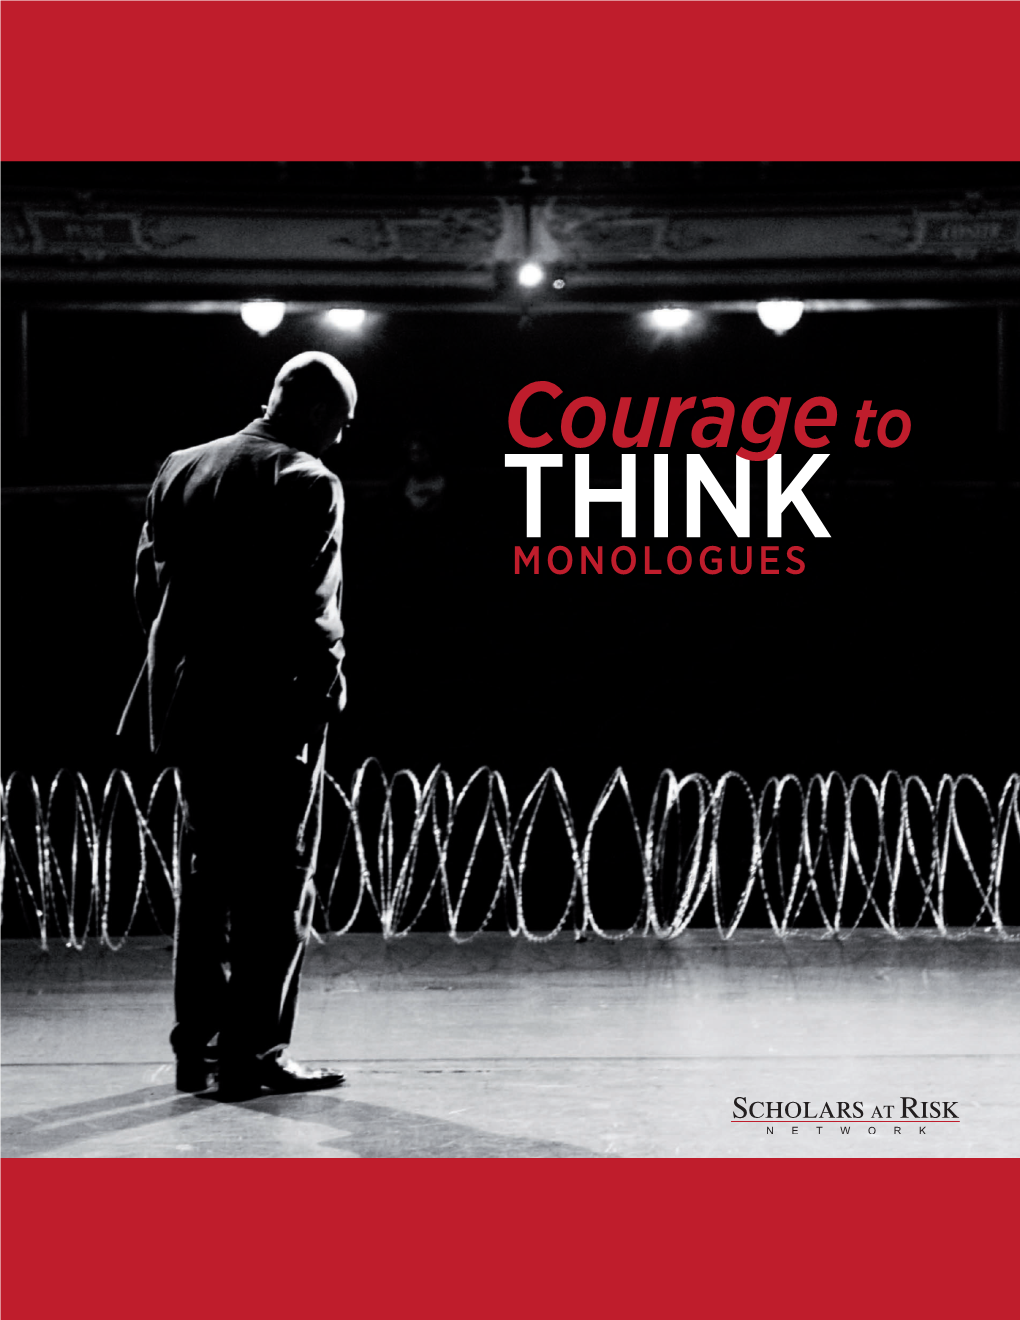 Download the Courage to Think Monologues